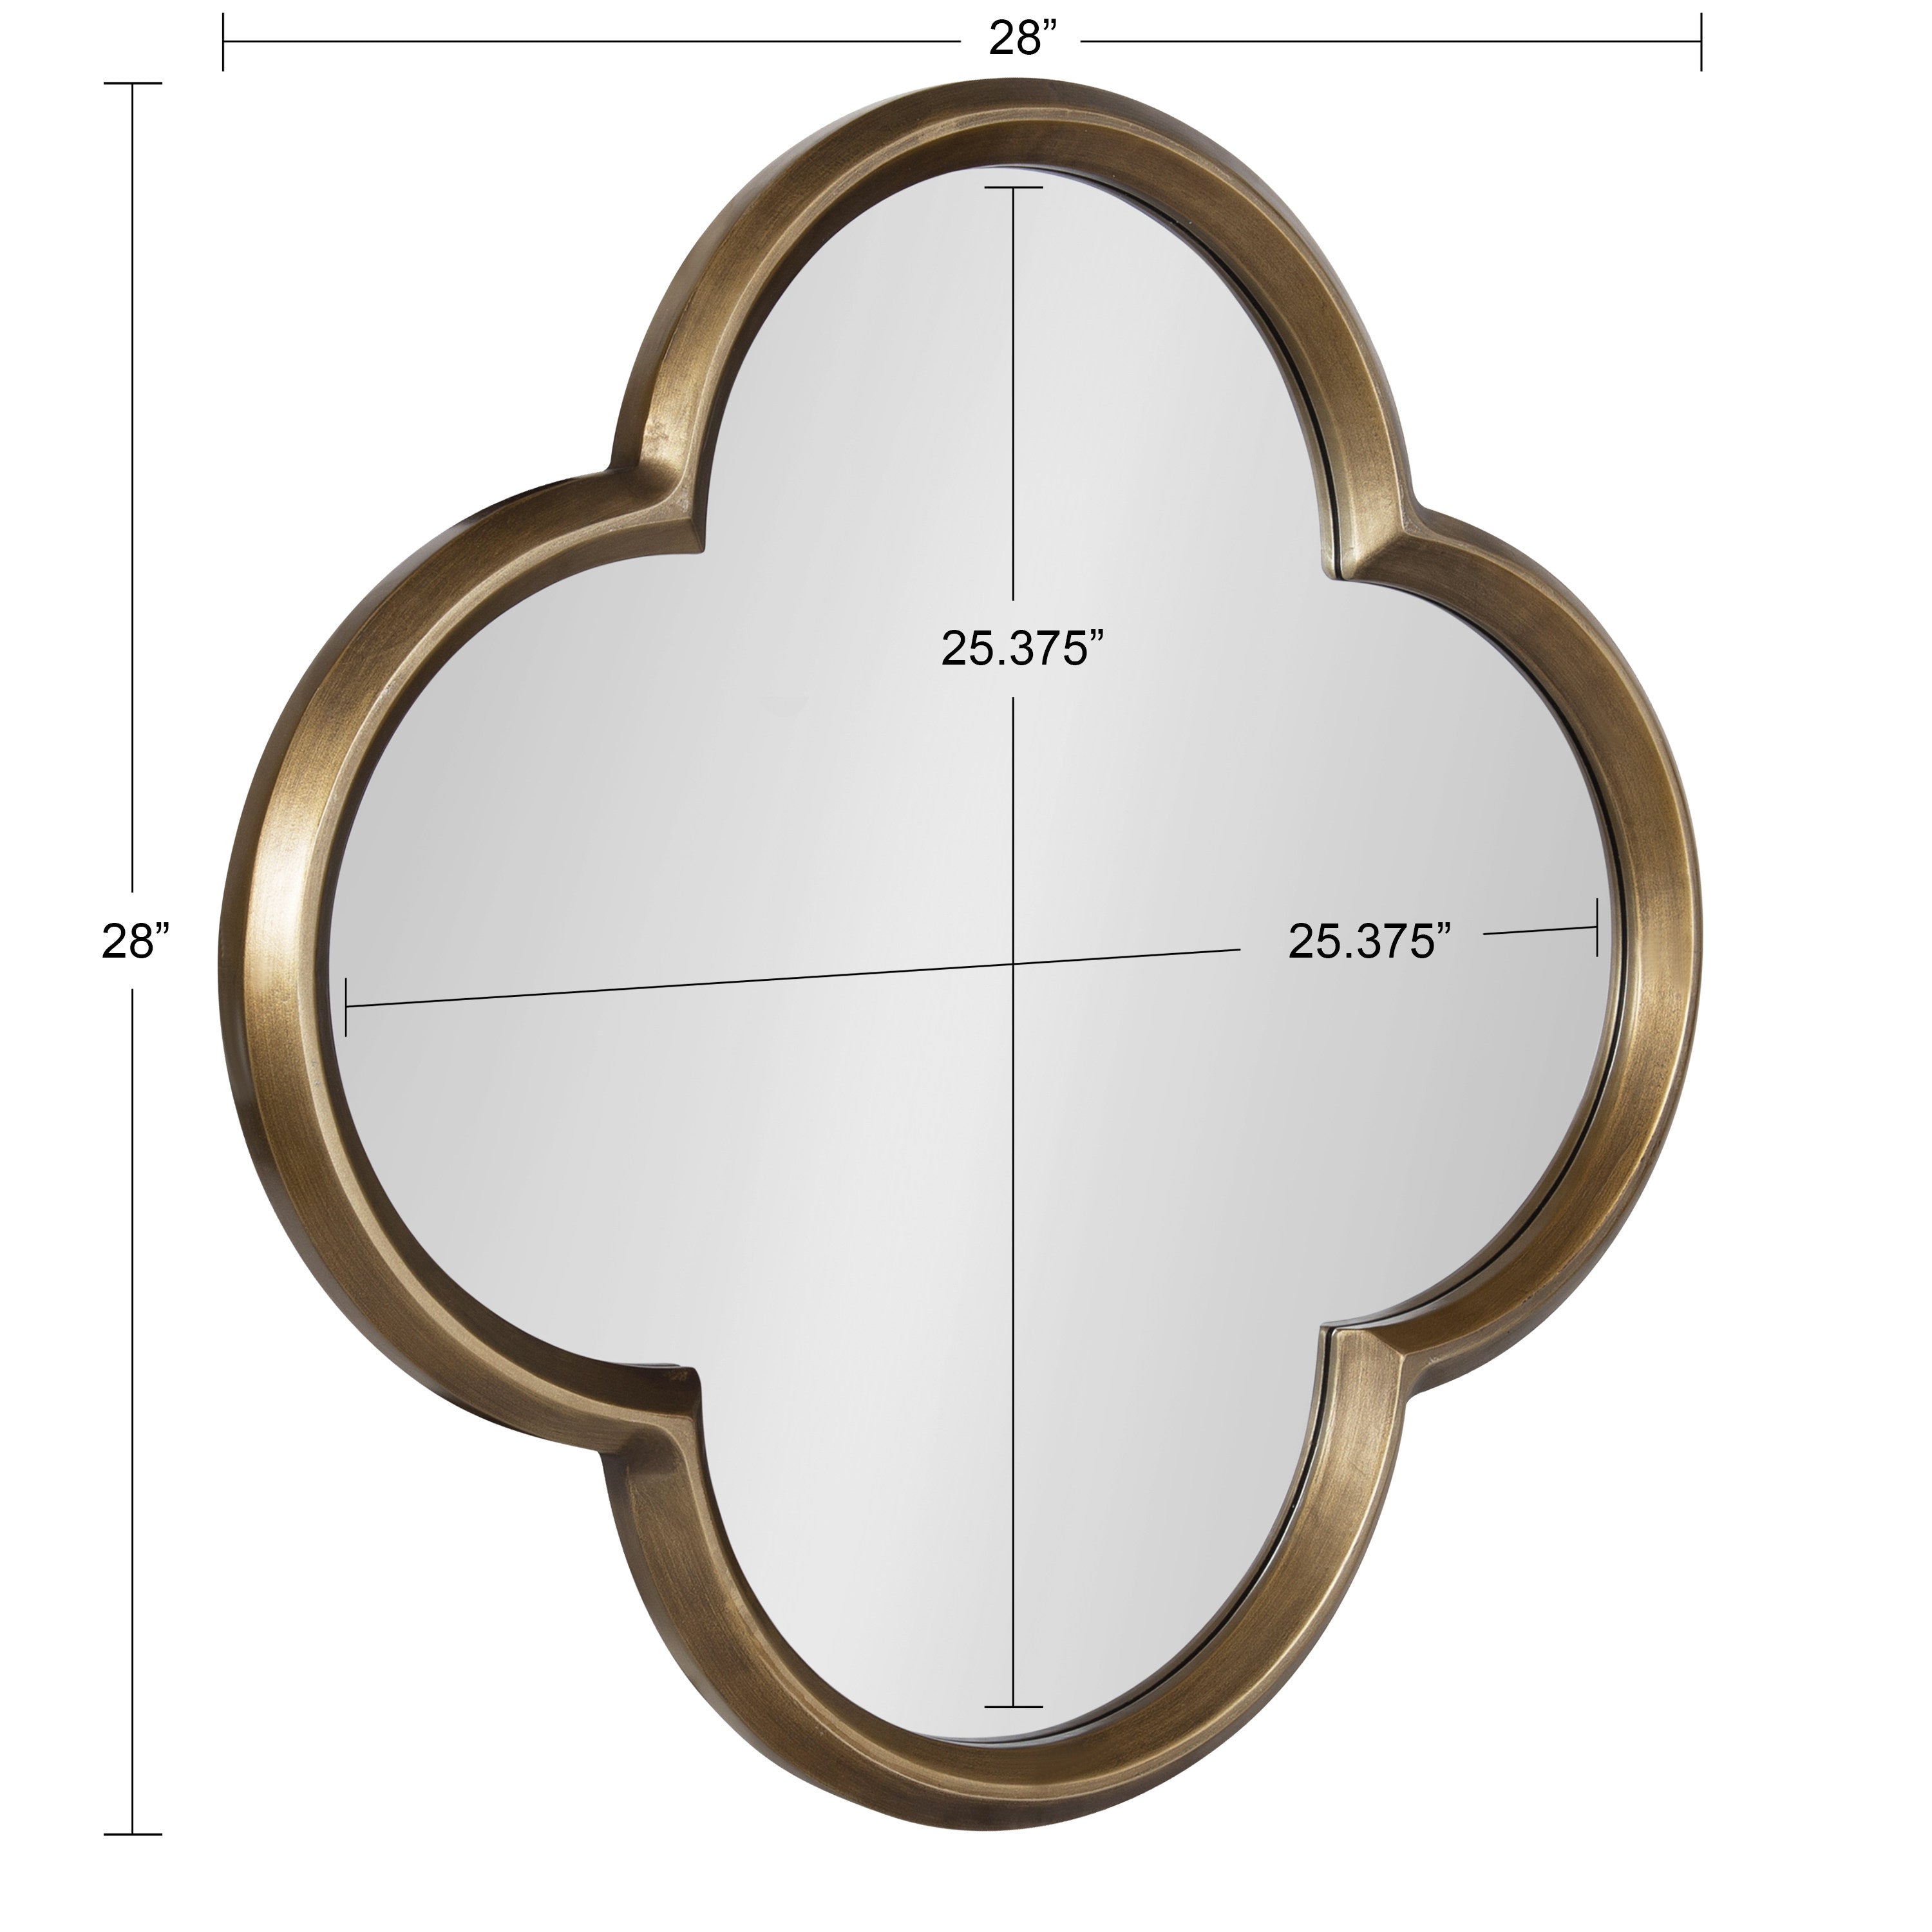 Krisi Scalloped Framed Wall Mirror